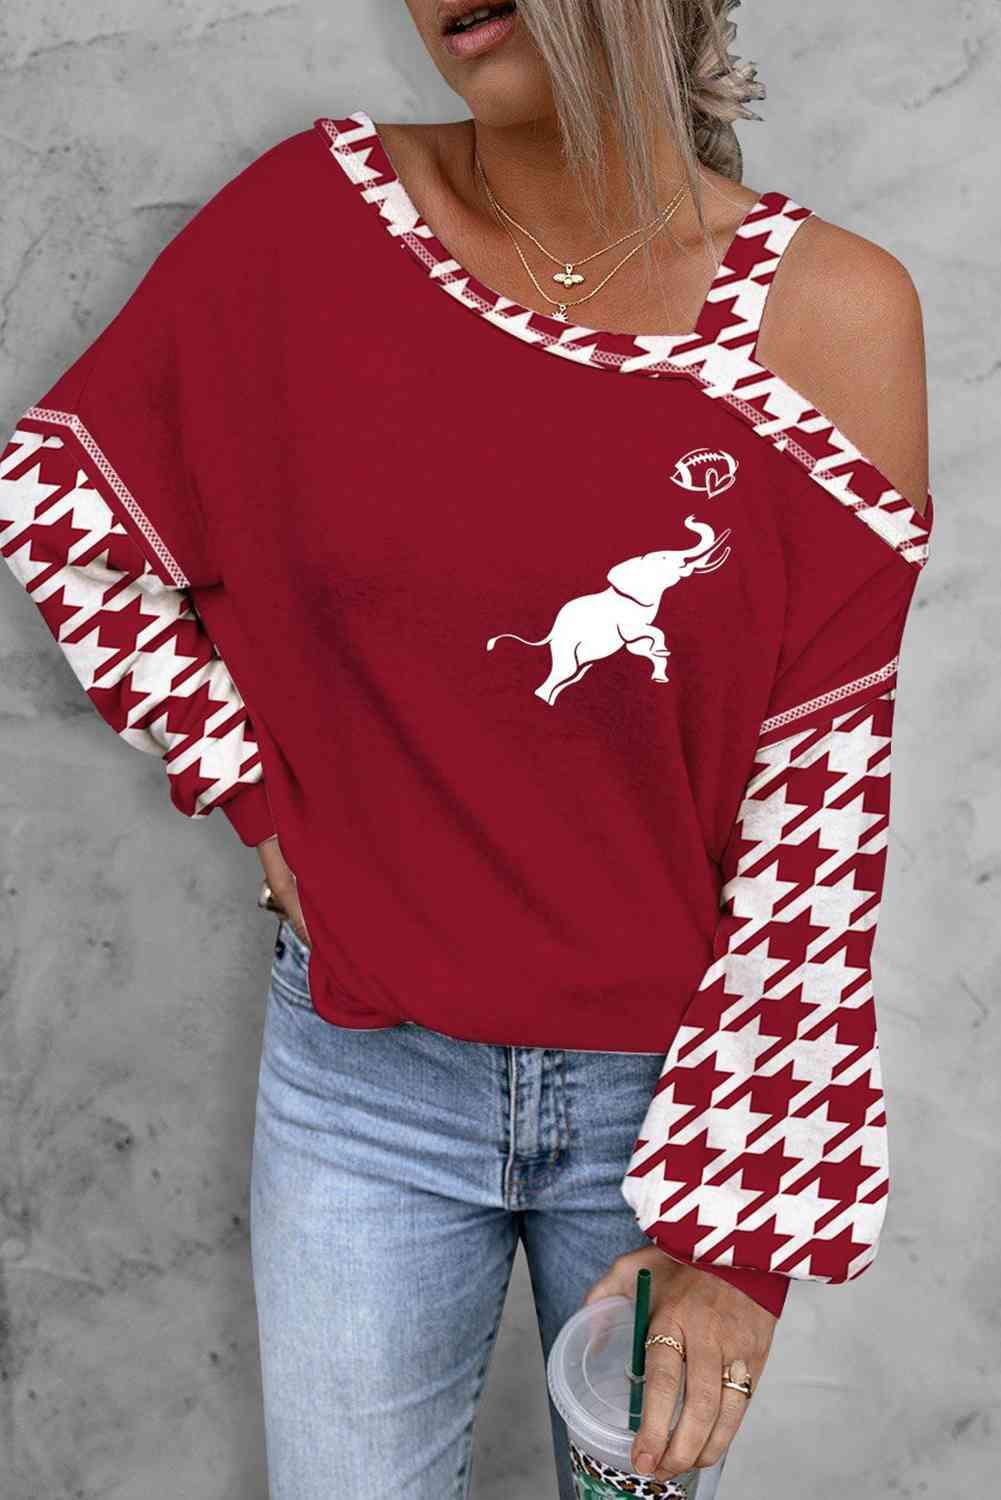 a woman wearing a red and white sweater with a dog on it